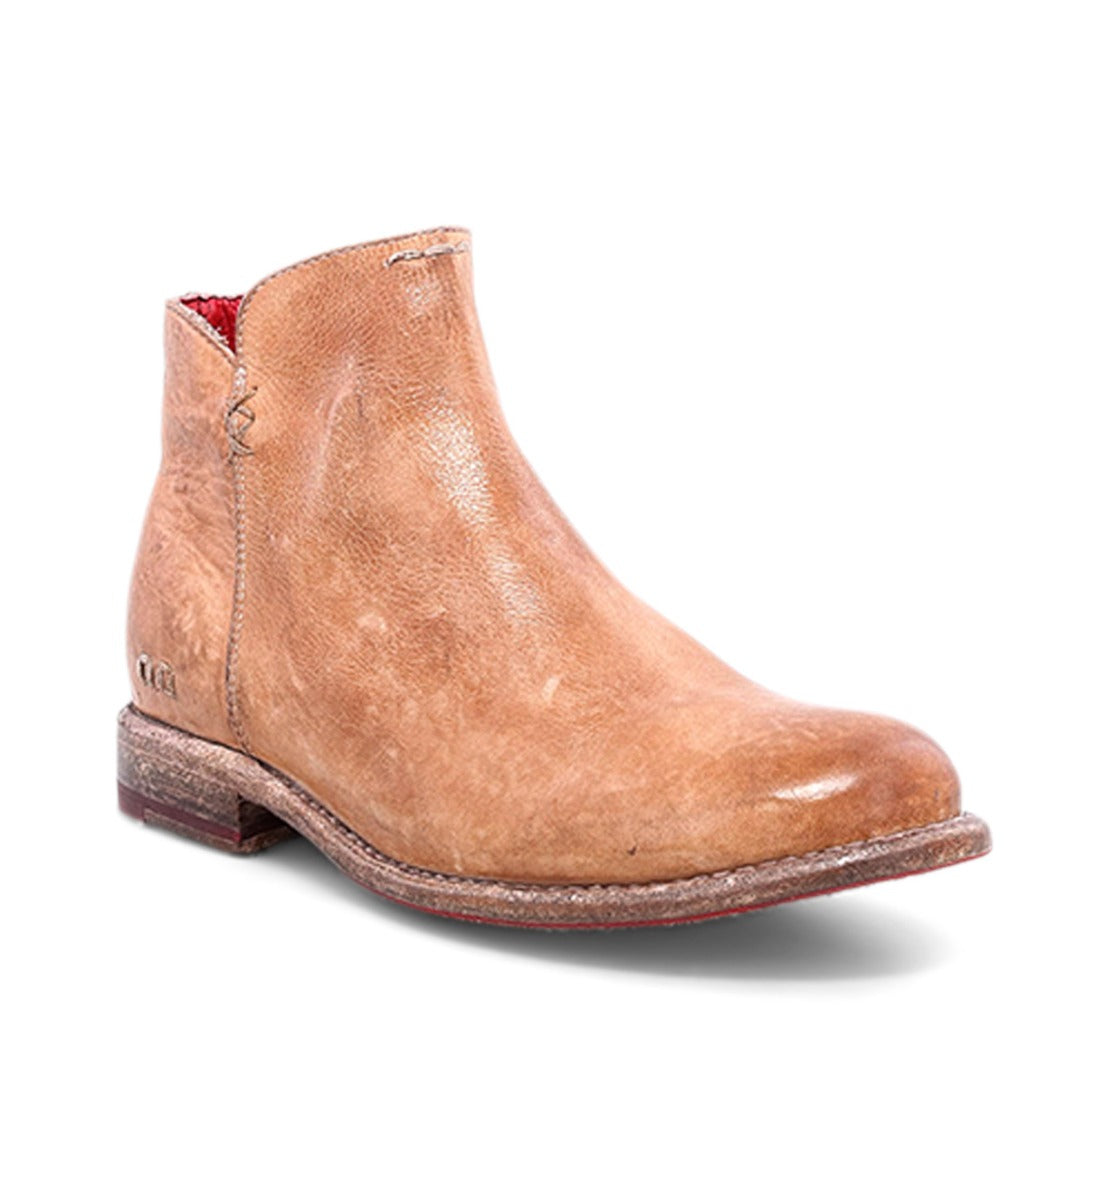 A Yurisa tan ankle boot by Bed Stu.